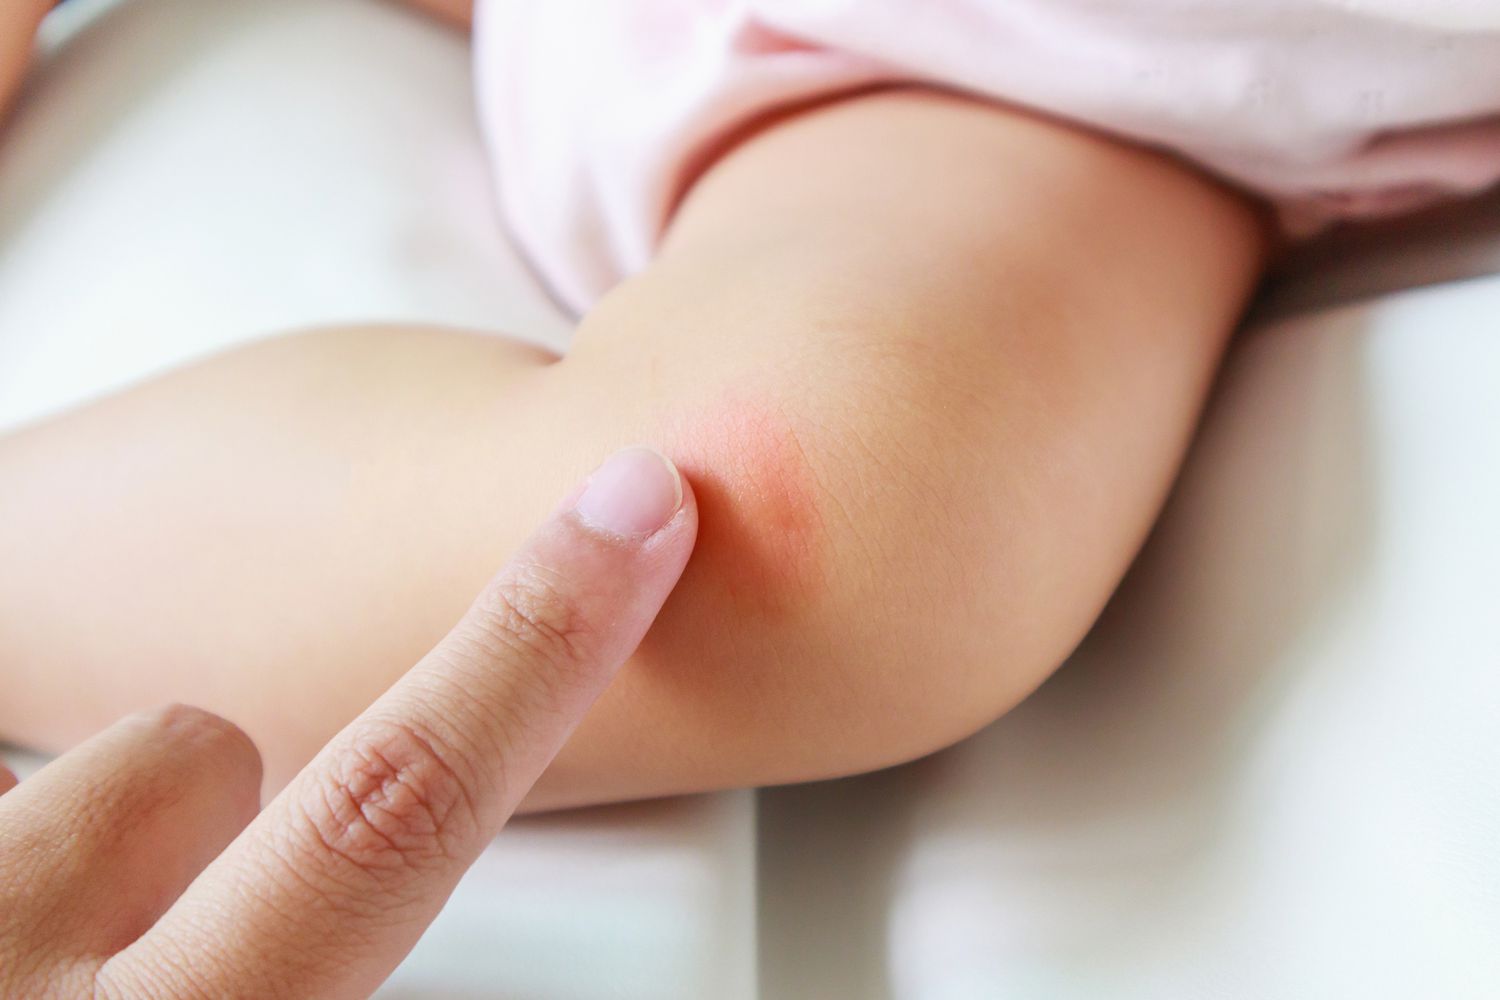 Skin Rash Treatment: How to Stop the Itch | Parents